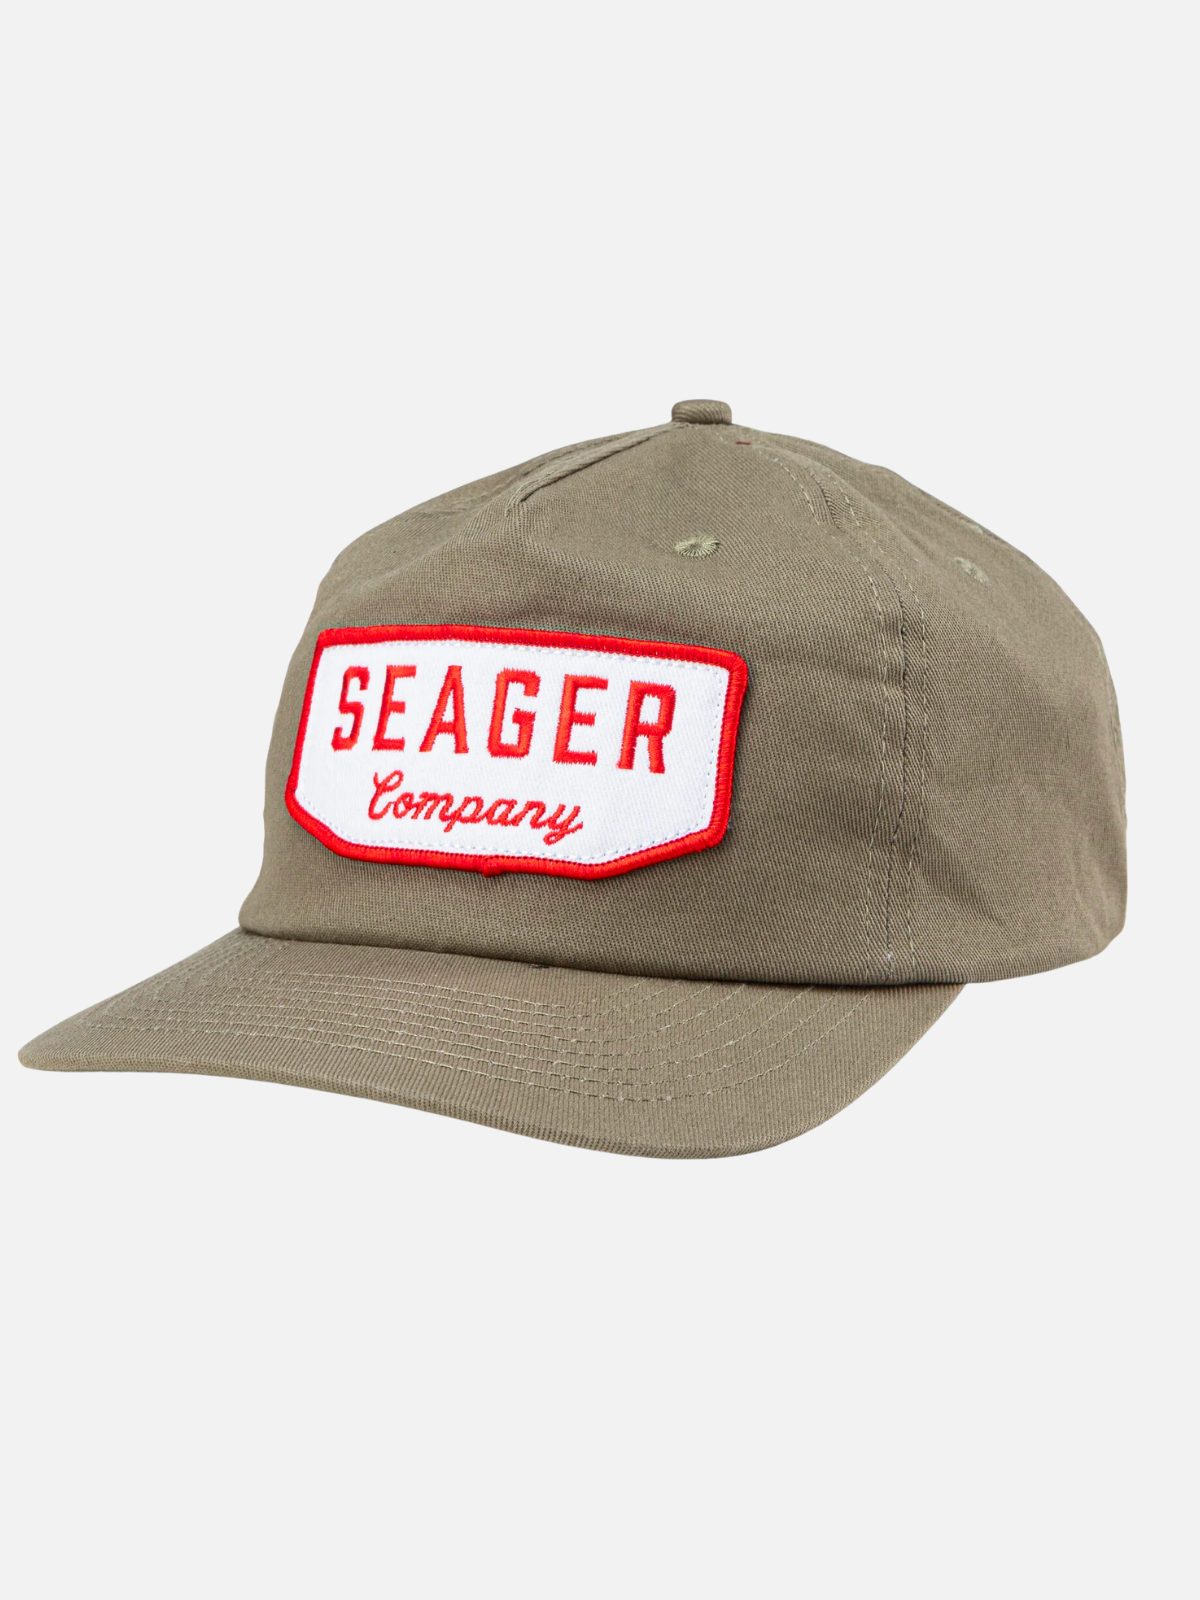 seager wilson snapback stone grey gray tan brown white red seager brand logo patch cotton spandex blend kempt athens ga georgia men's clothing store